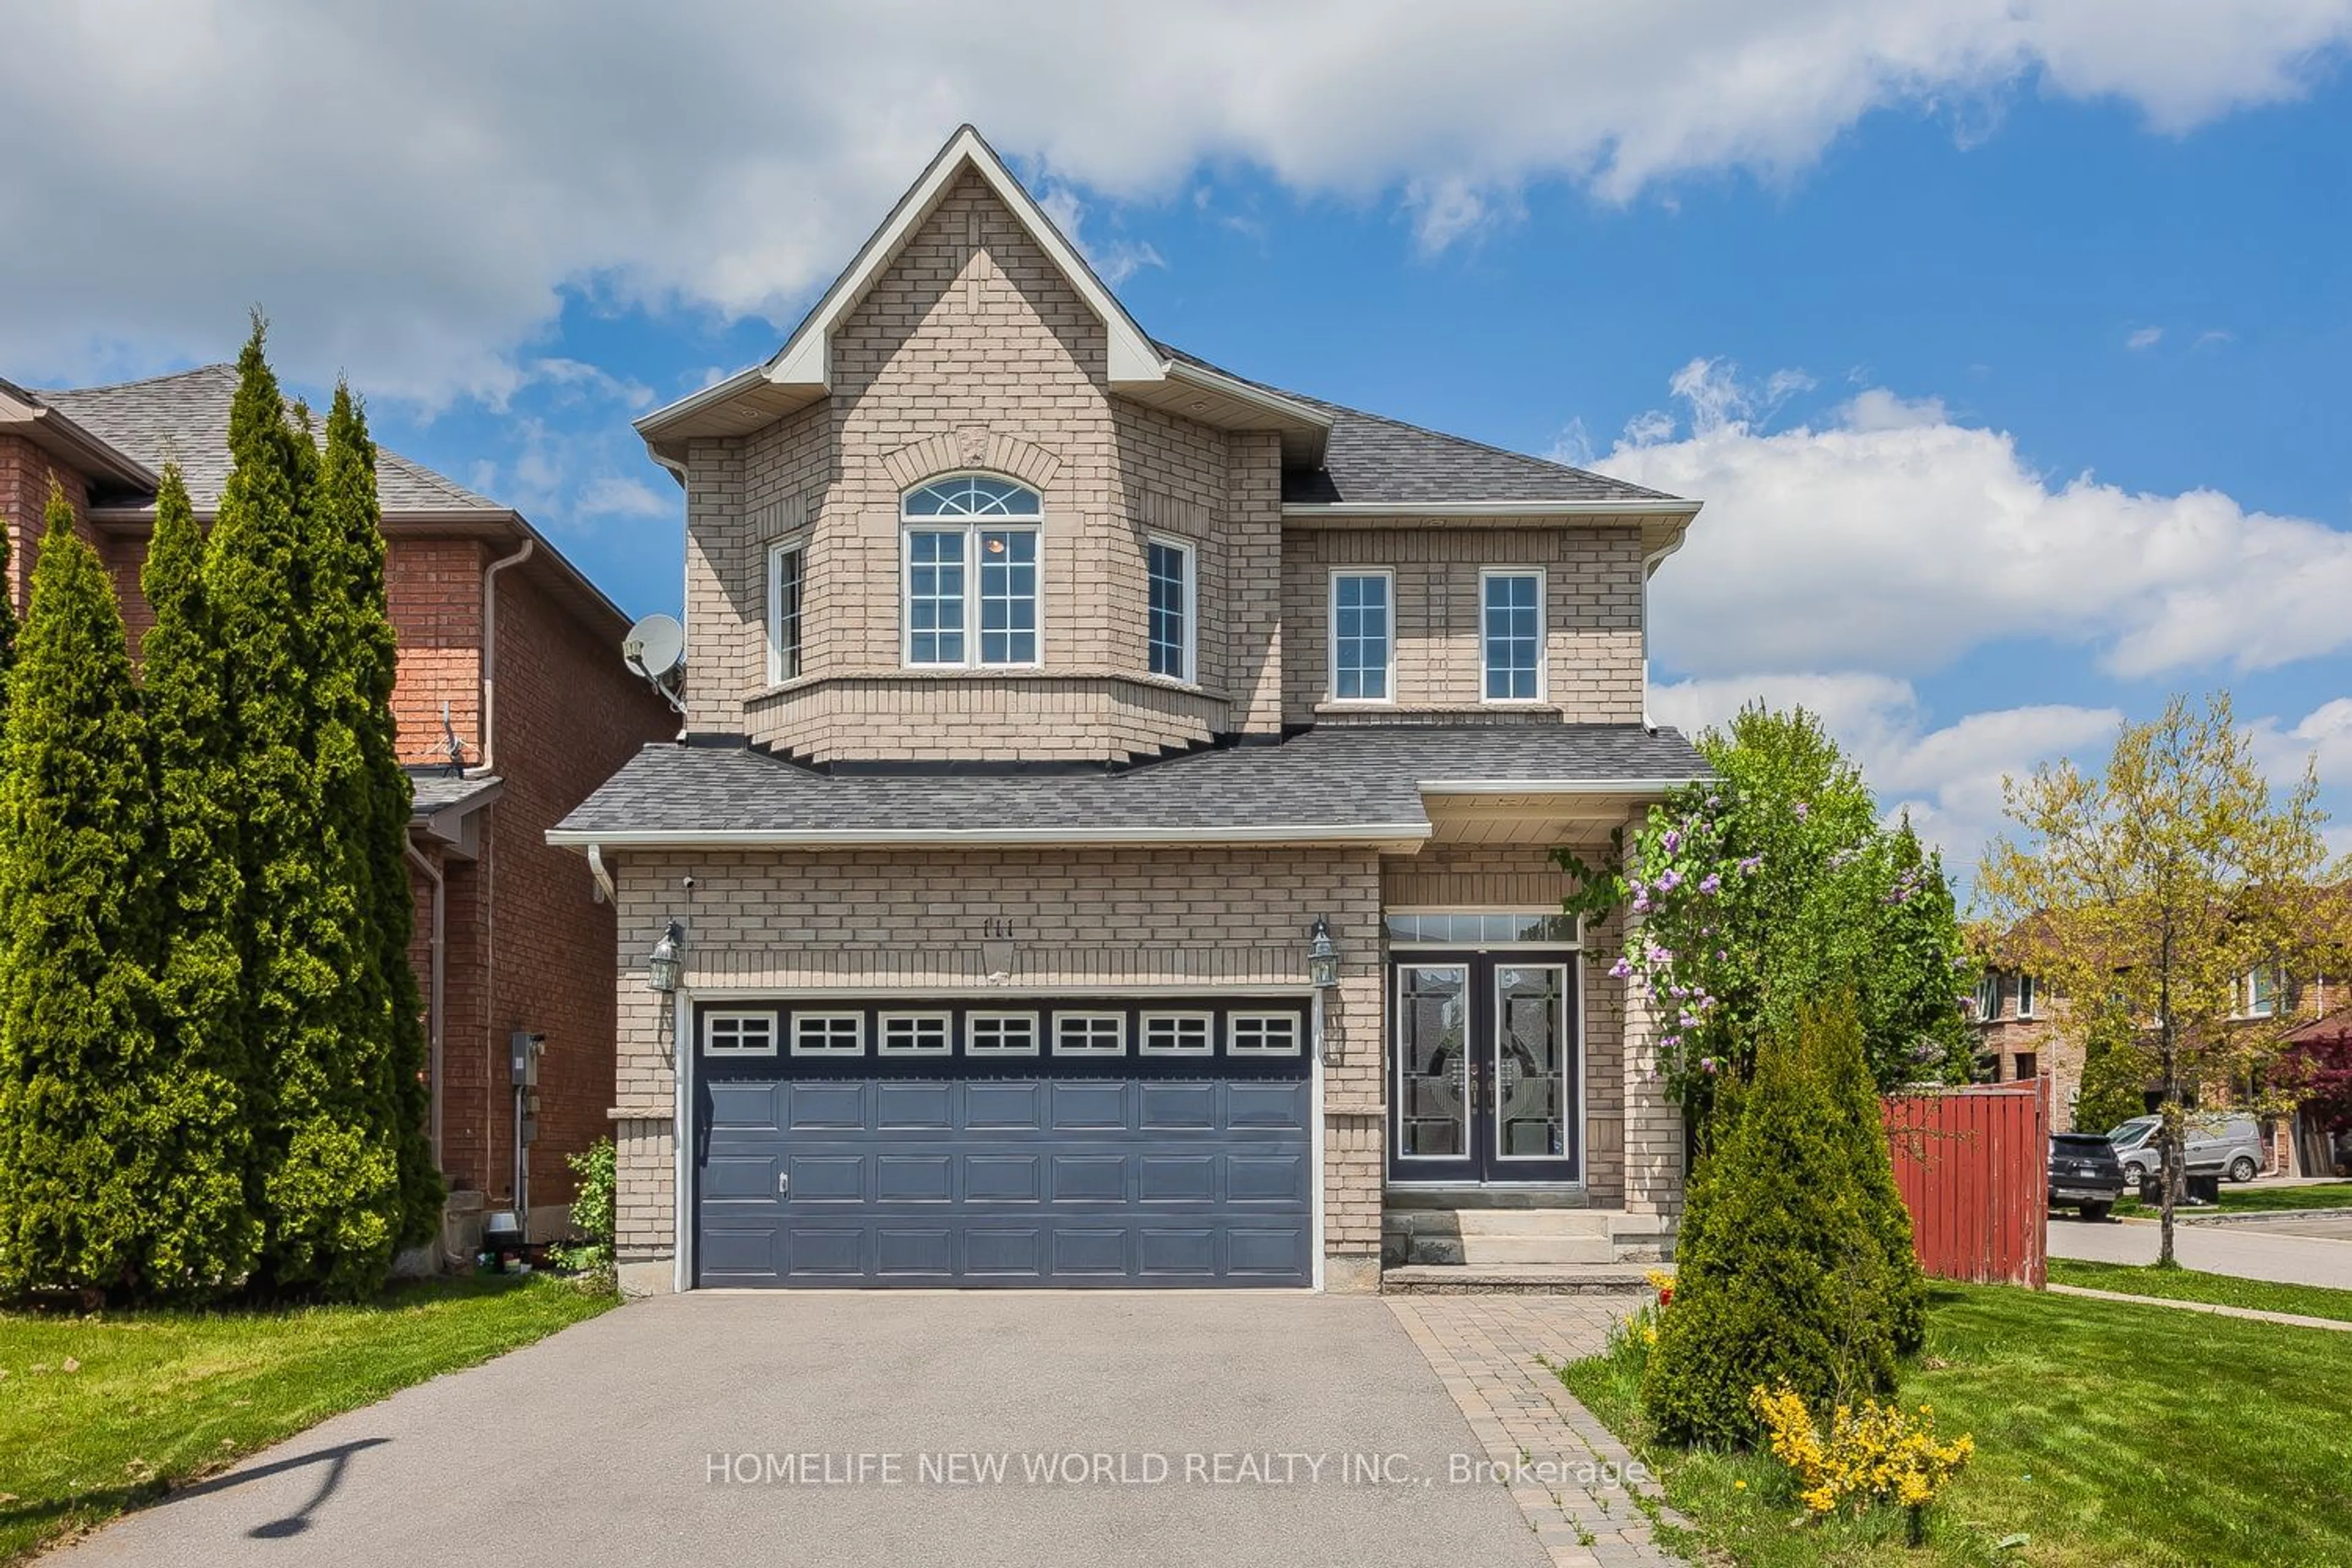 Home with brick exterior material for 111 Brightsview Dr, Richmond Hill Ontario L4E 3Y9